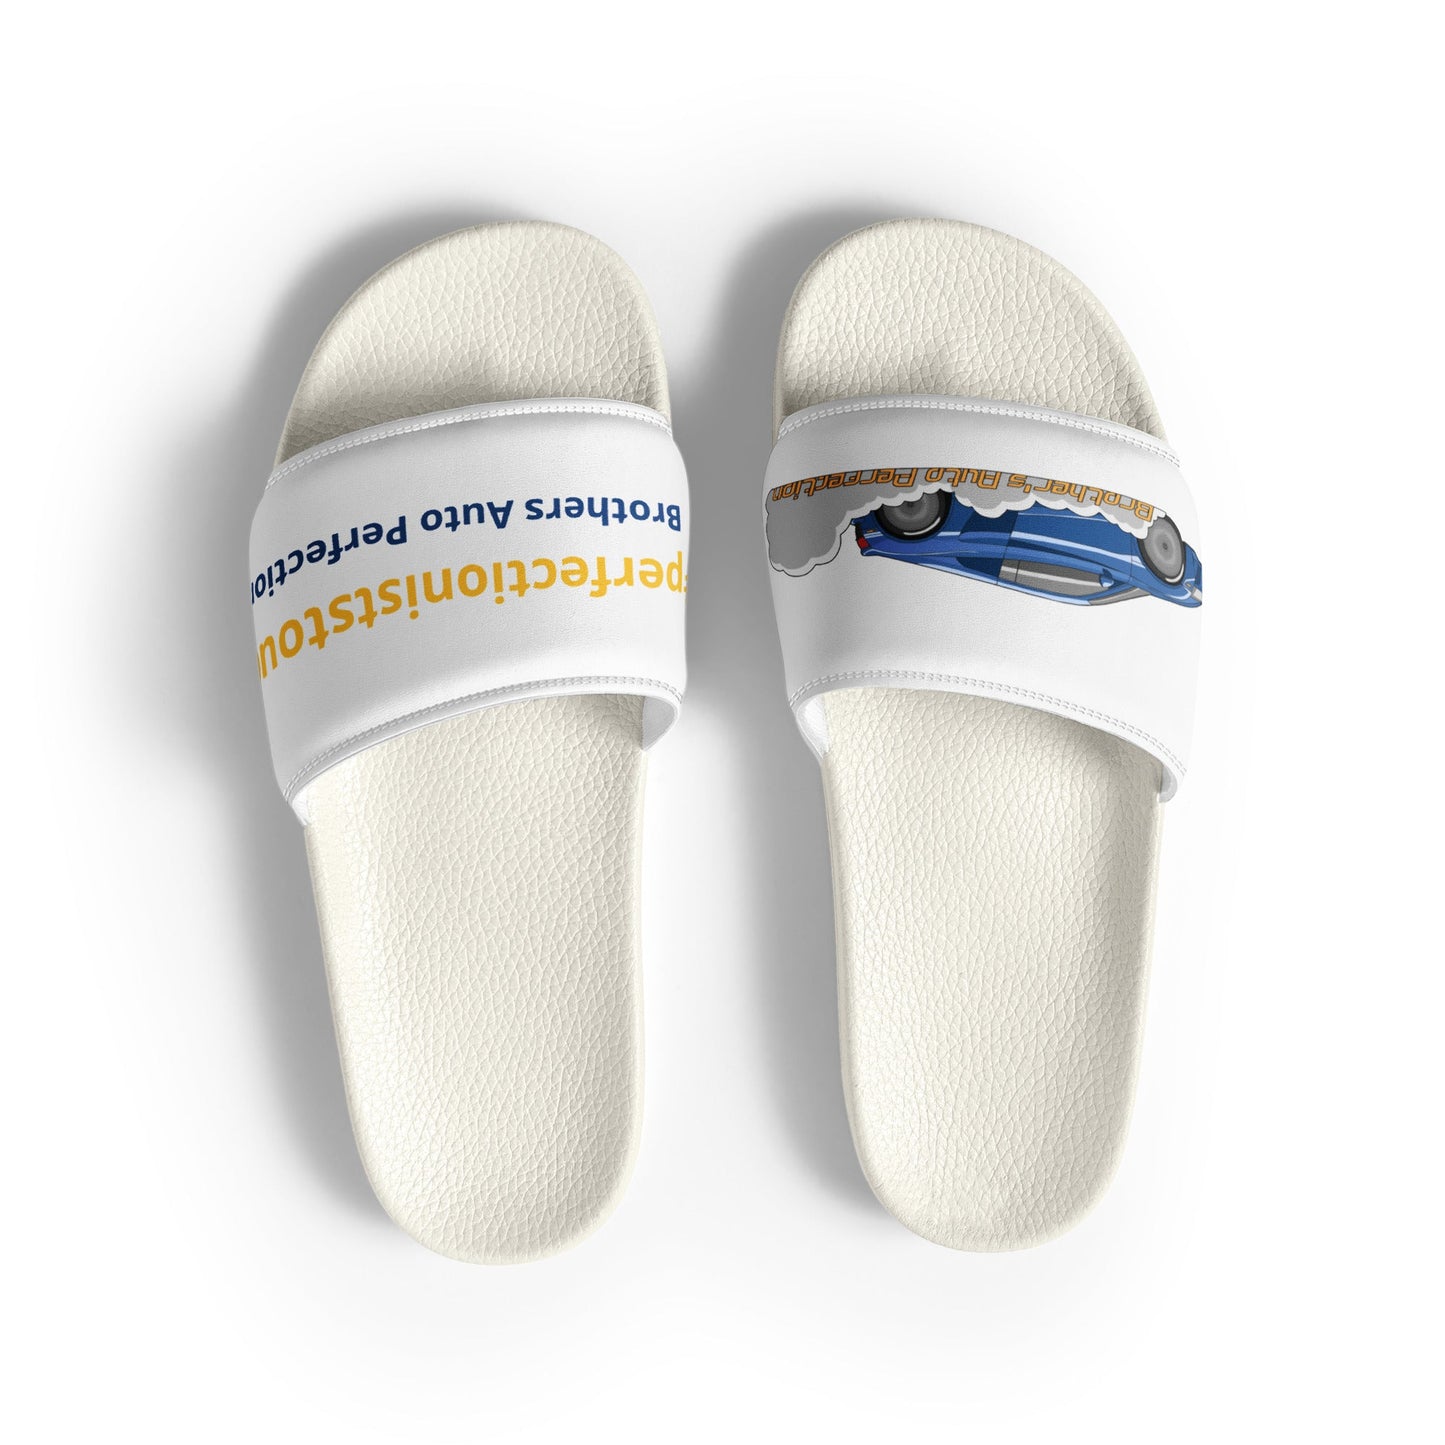 Perfectionists Men’s slides - Brothers Auto Perfection